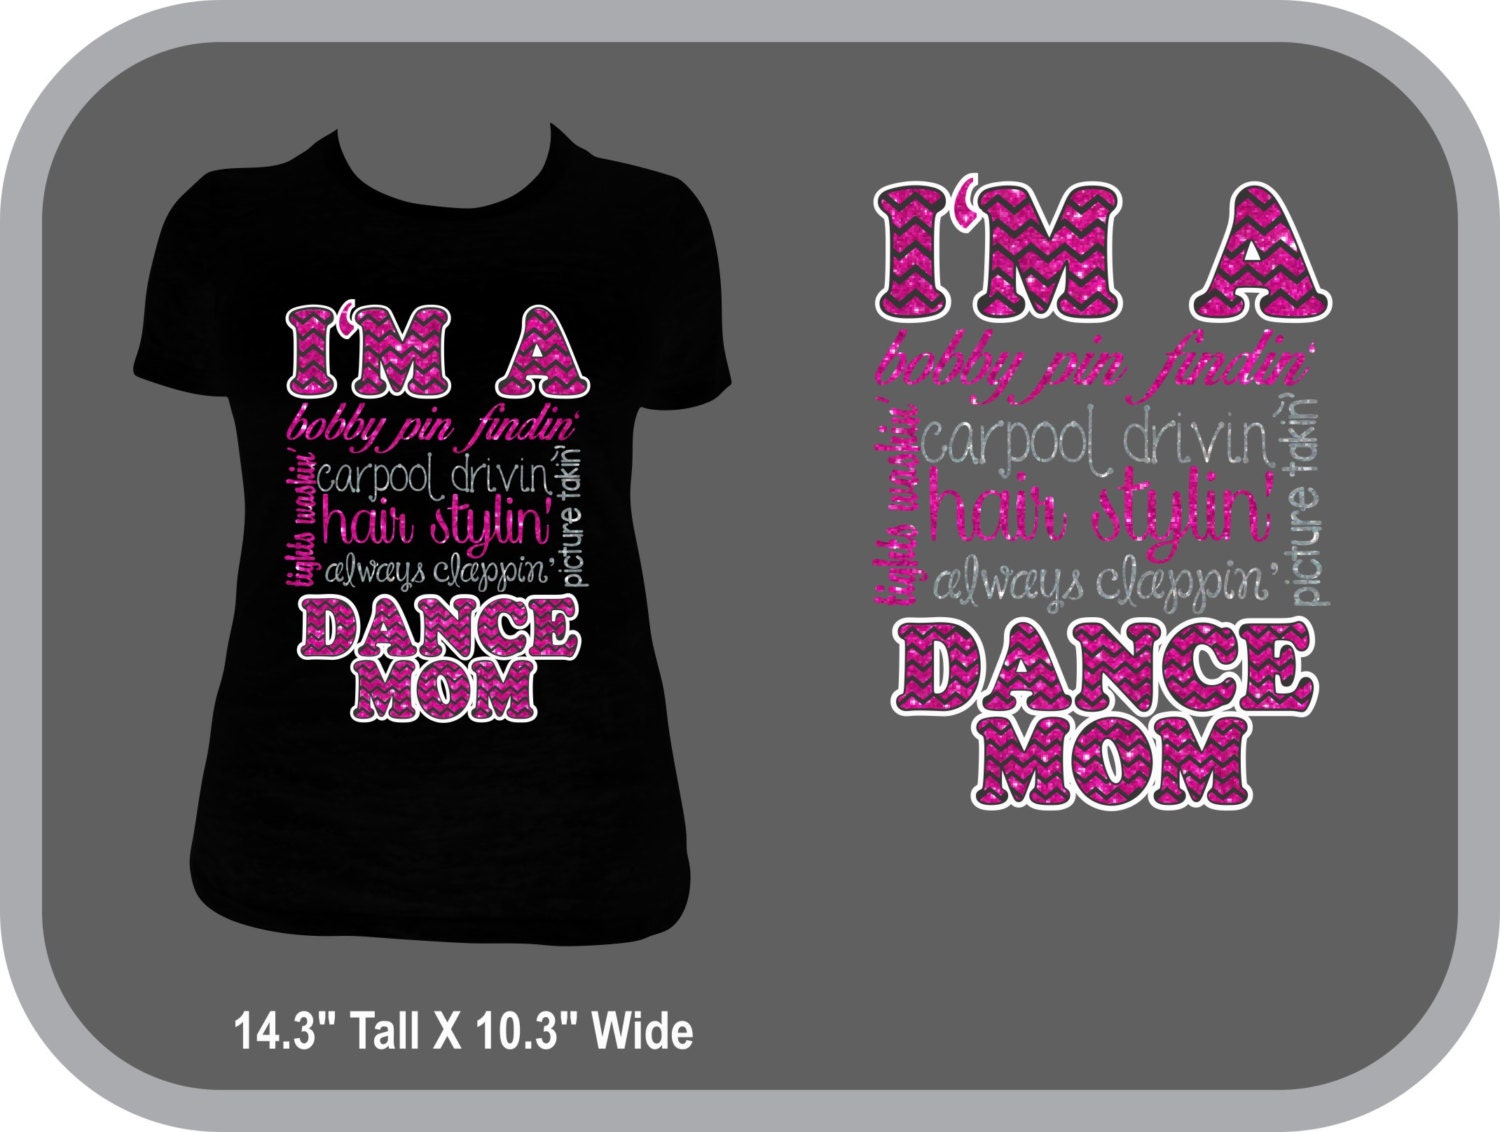 Download Dance Mom Shirt for Adults S-3XL by 2SassyChicBoutique on Etsy